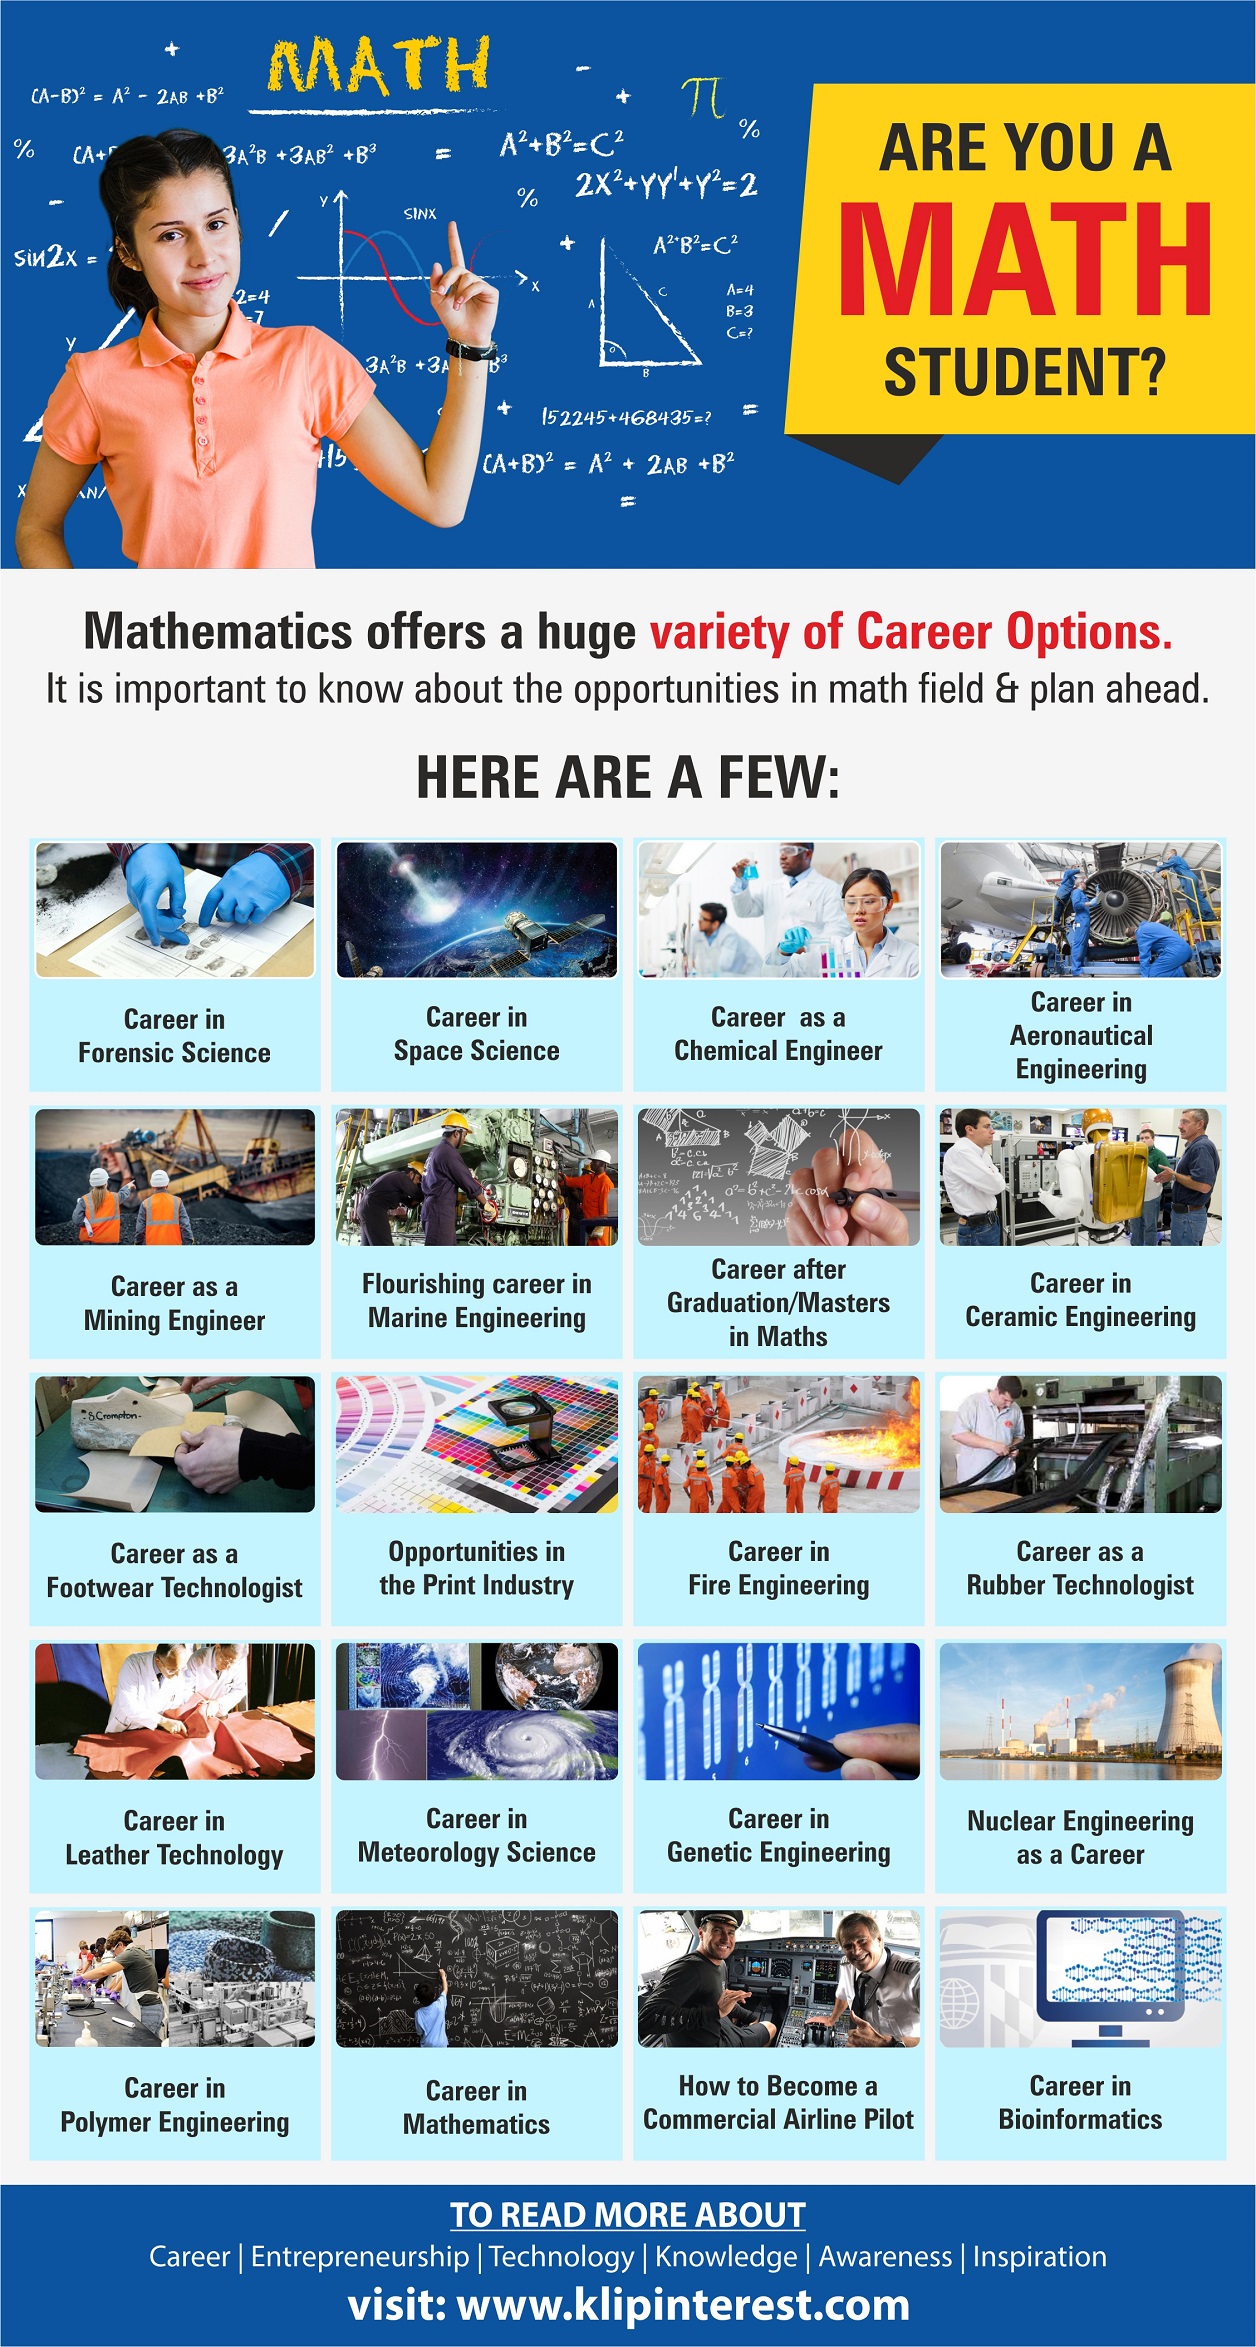 career options available to maths students after 12th